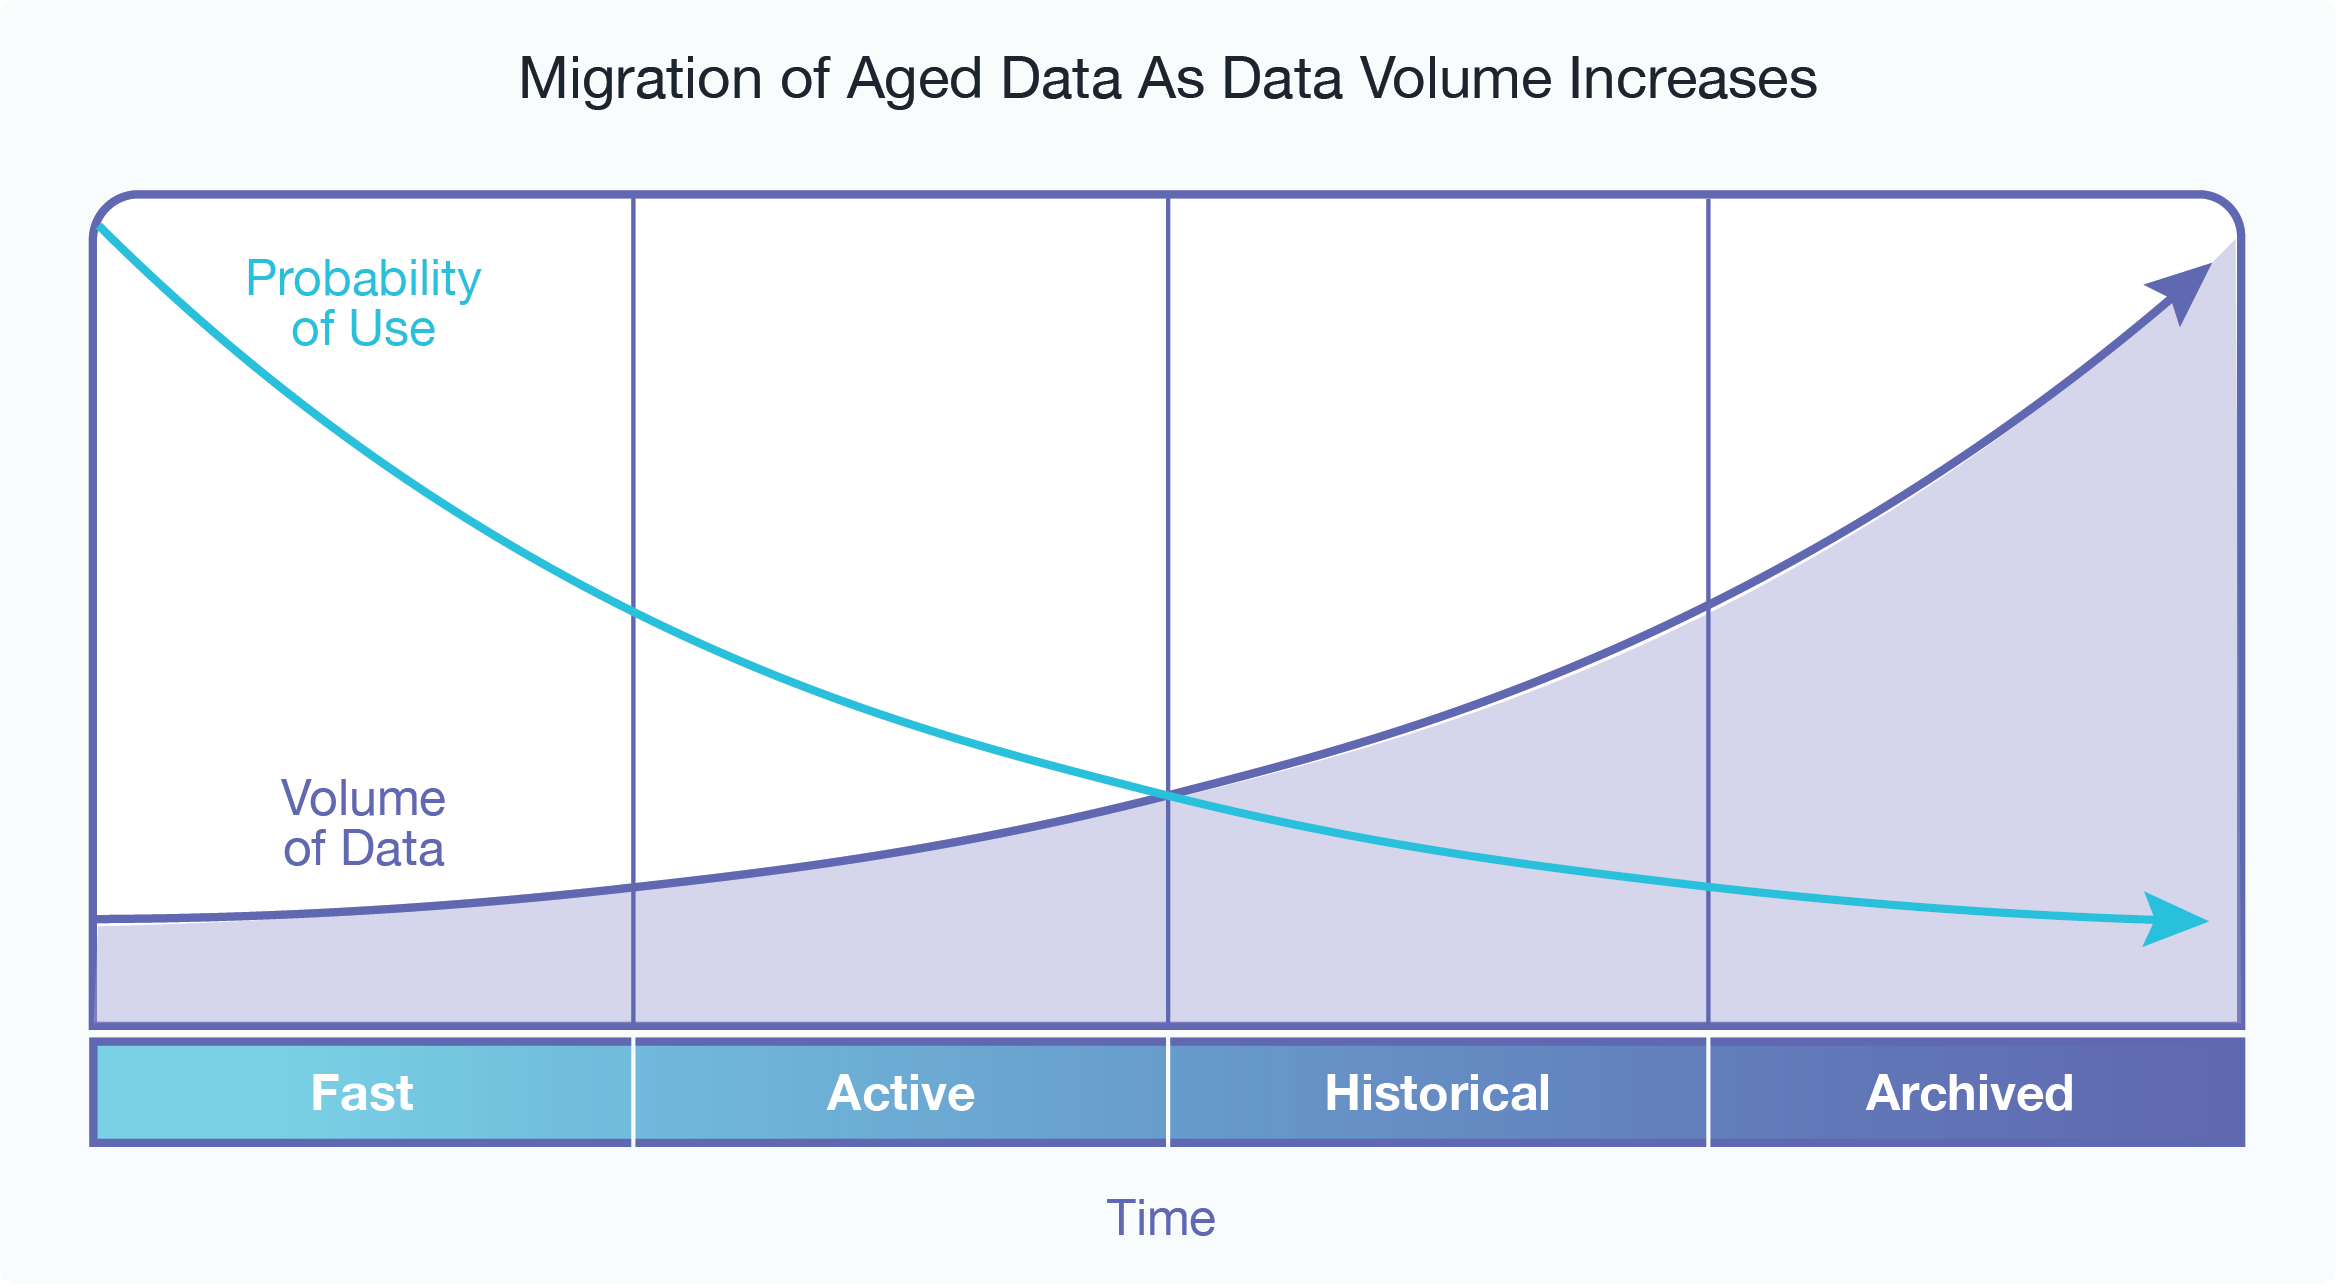 Graphic showing as data ages and becomes less updated and queried, it can be migrated to less expensive and more densely packed storage devices to make room for newer, more frequently accessed and updated data.